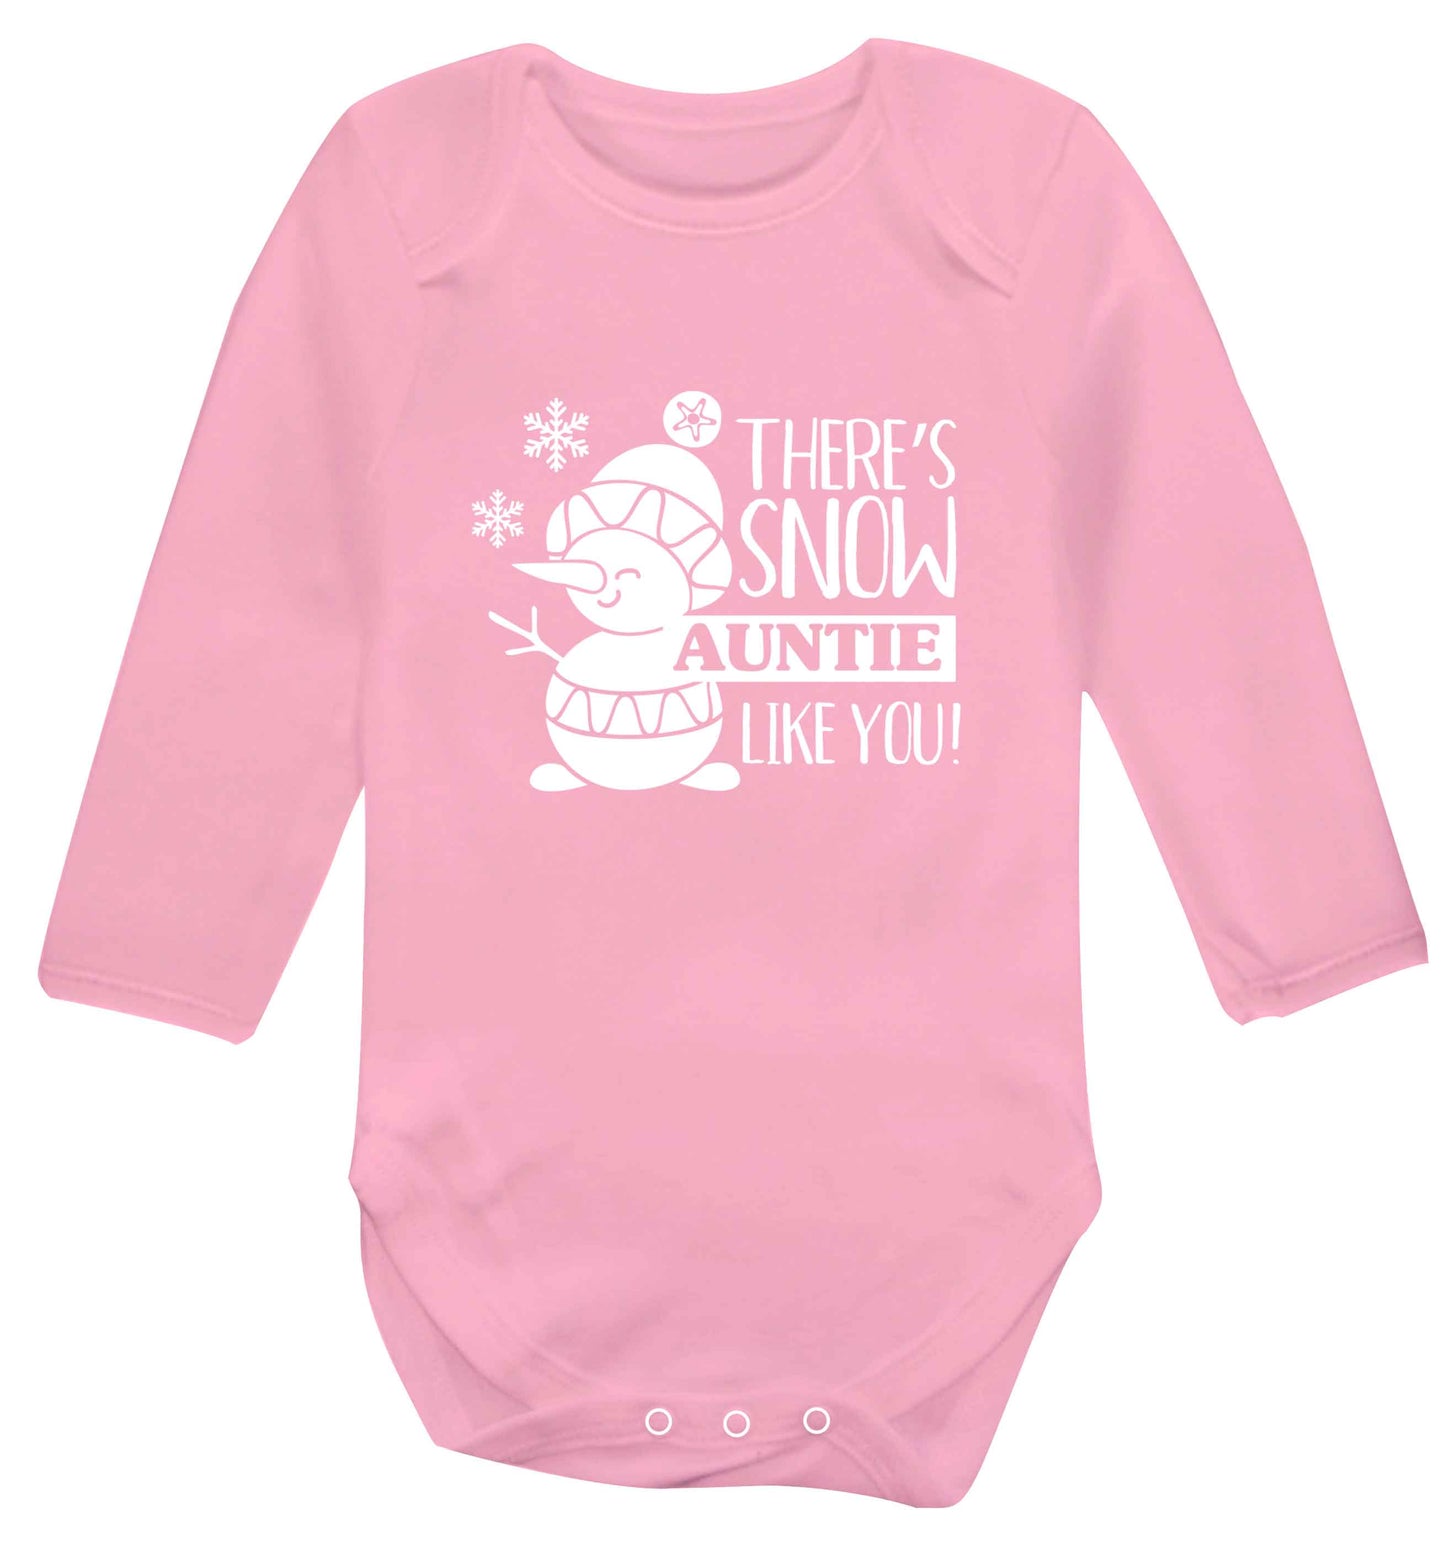 There's snow auntie like you baby vest long sleeved pale pink 6-12 months